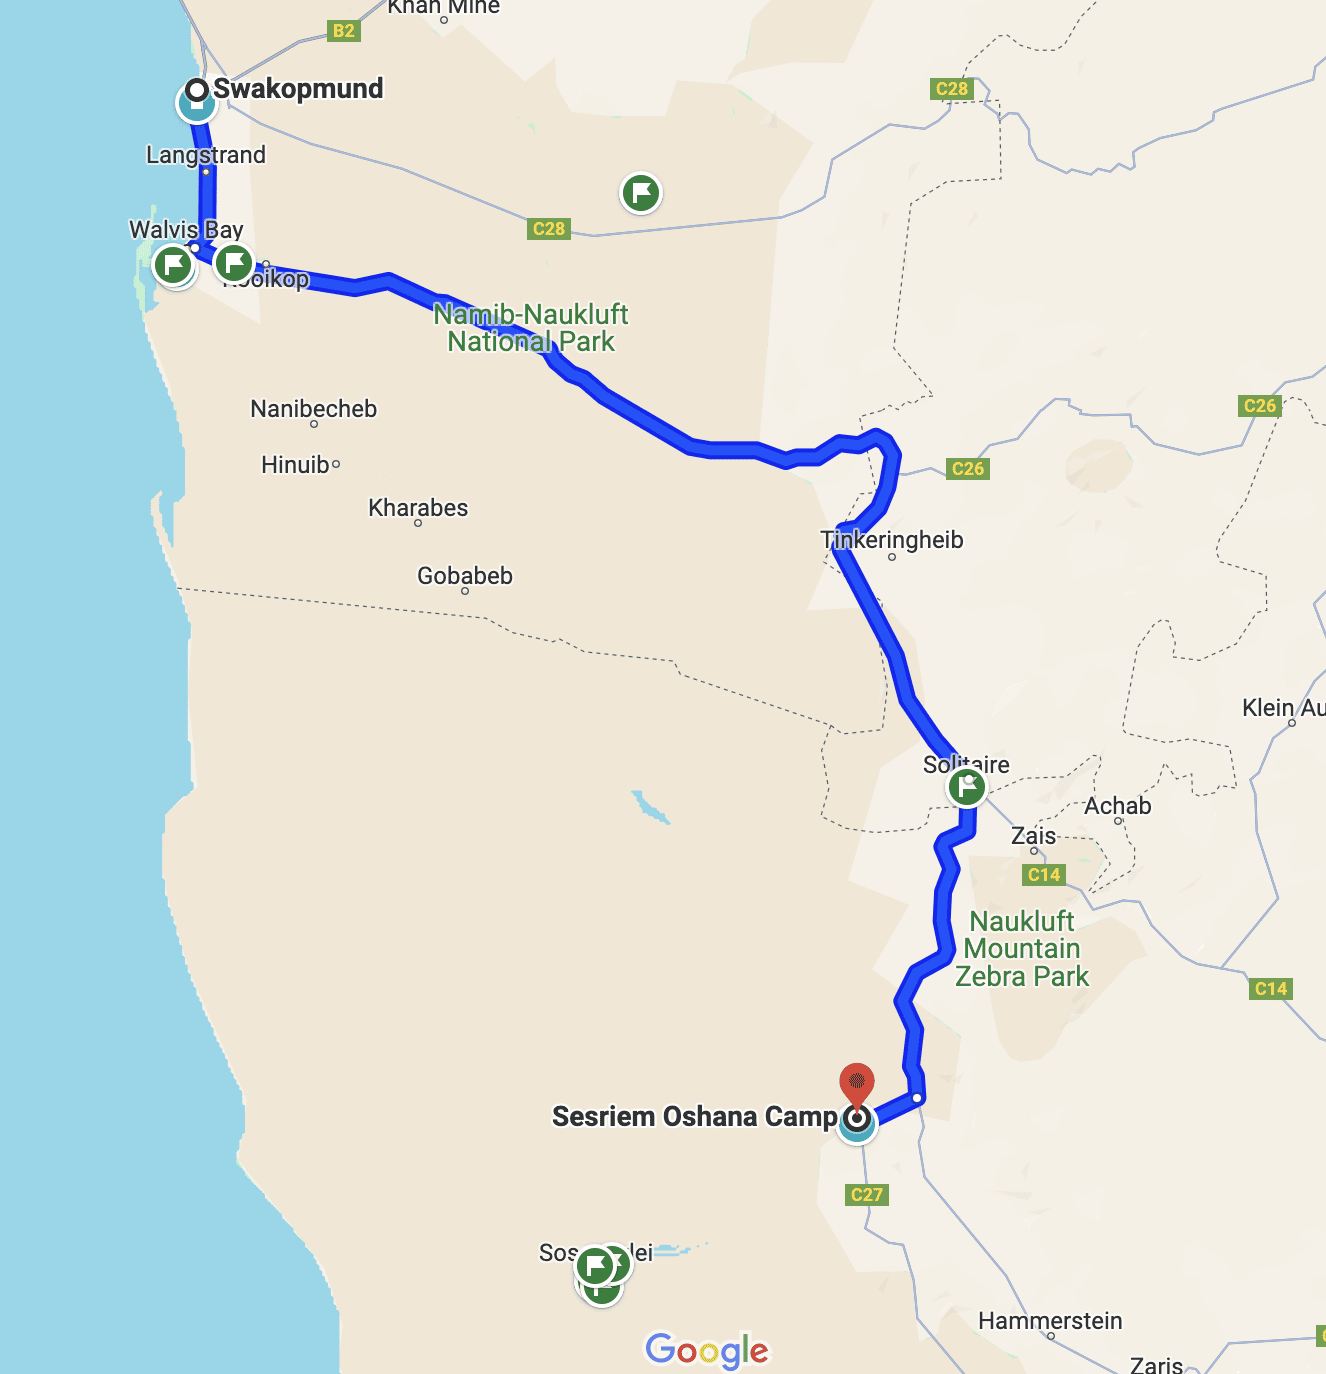 Map showing route from Swakopmund to Sossusvlei